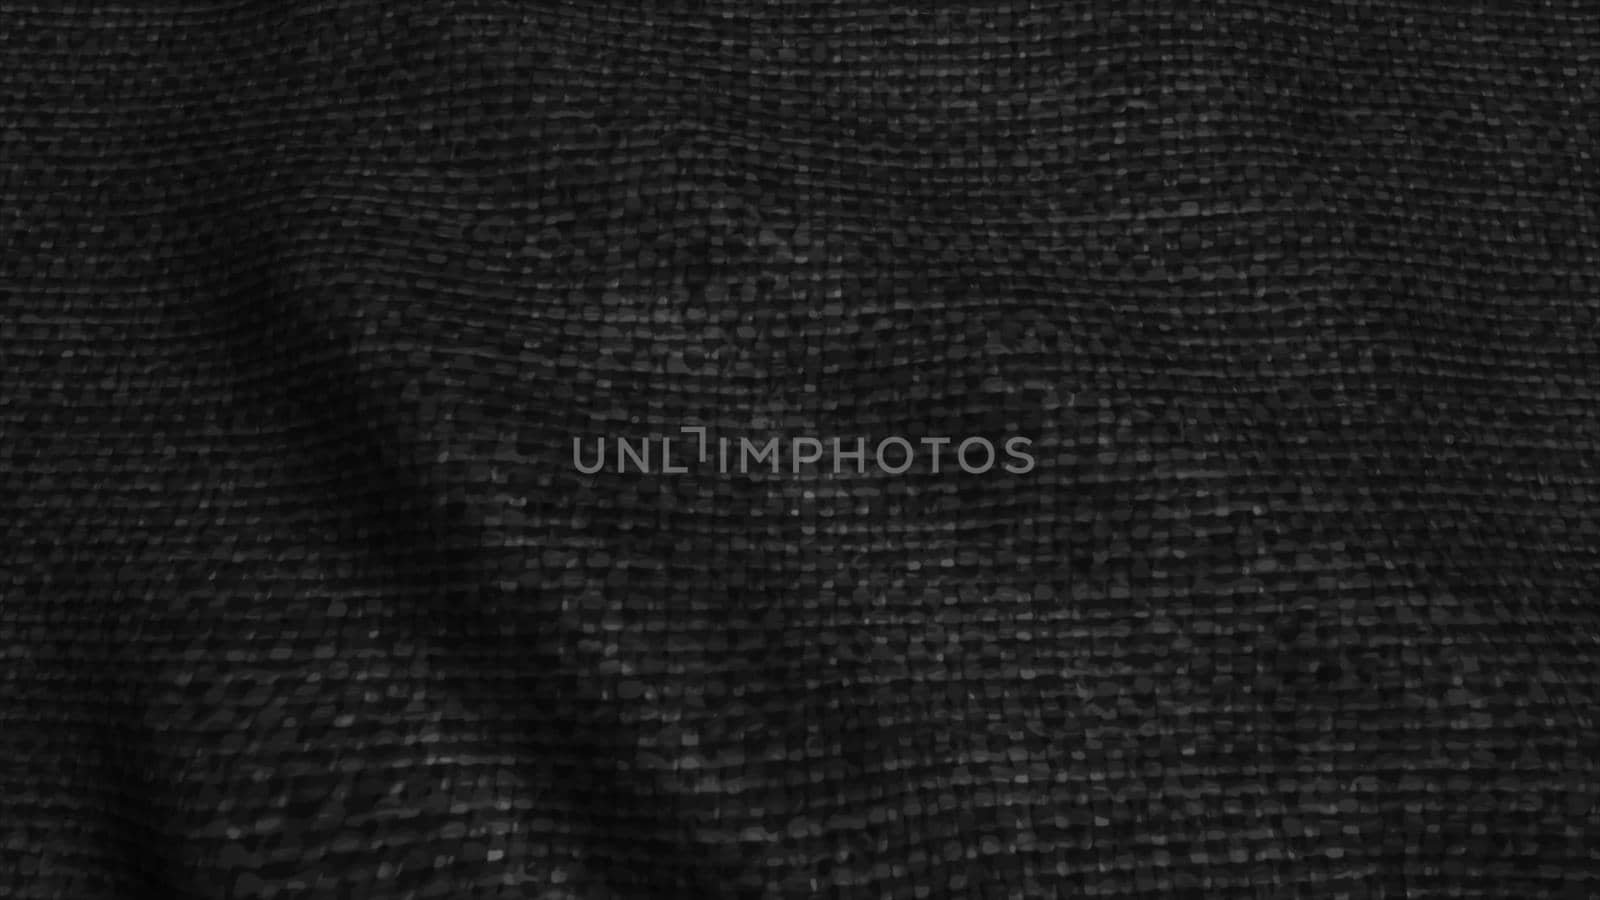 Seamless loop with highly detailed black fabric texture by nolimit046